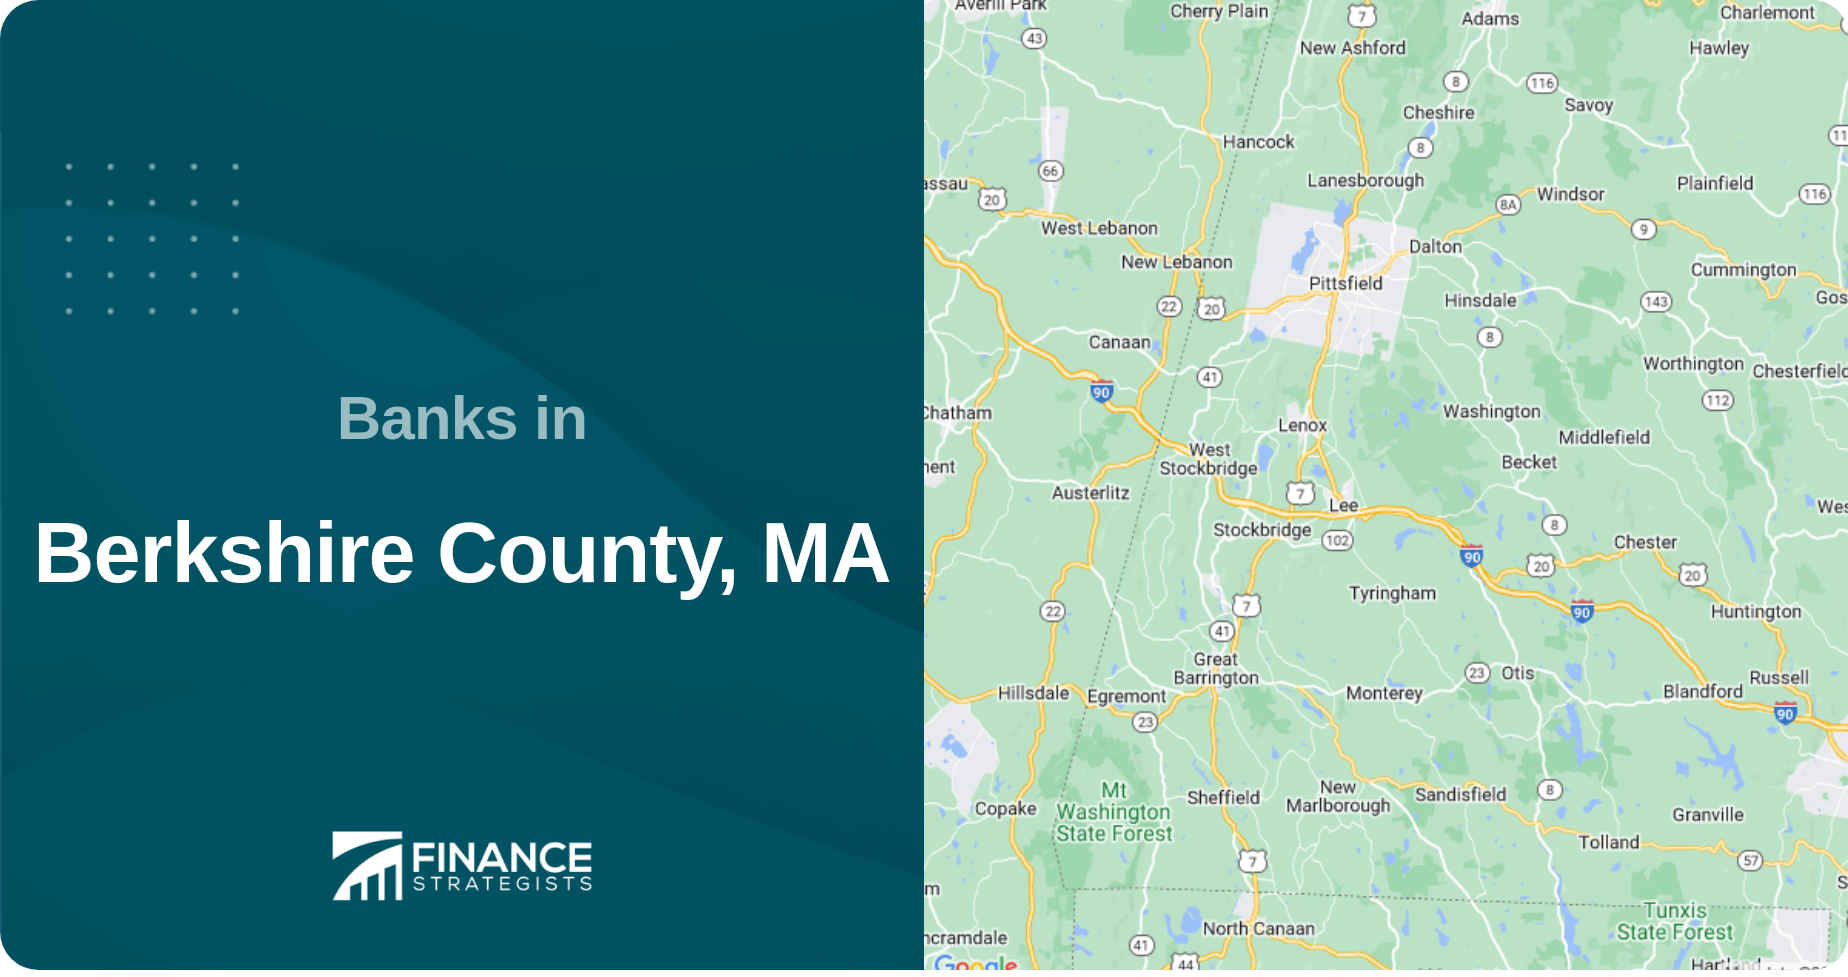 Banks in Berkshire County, MA